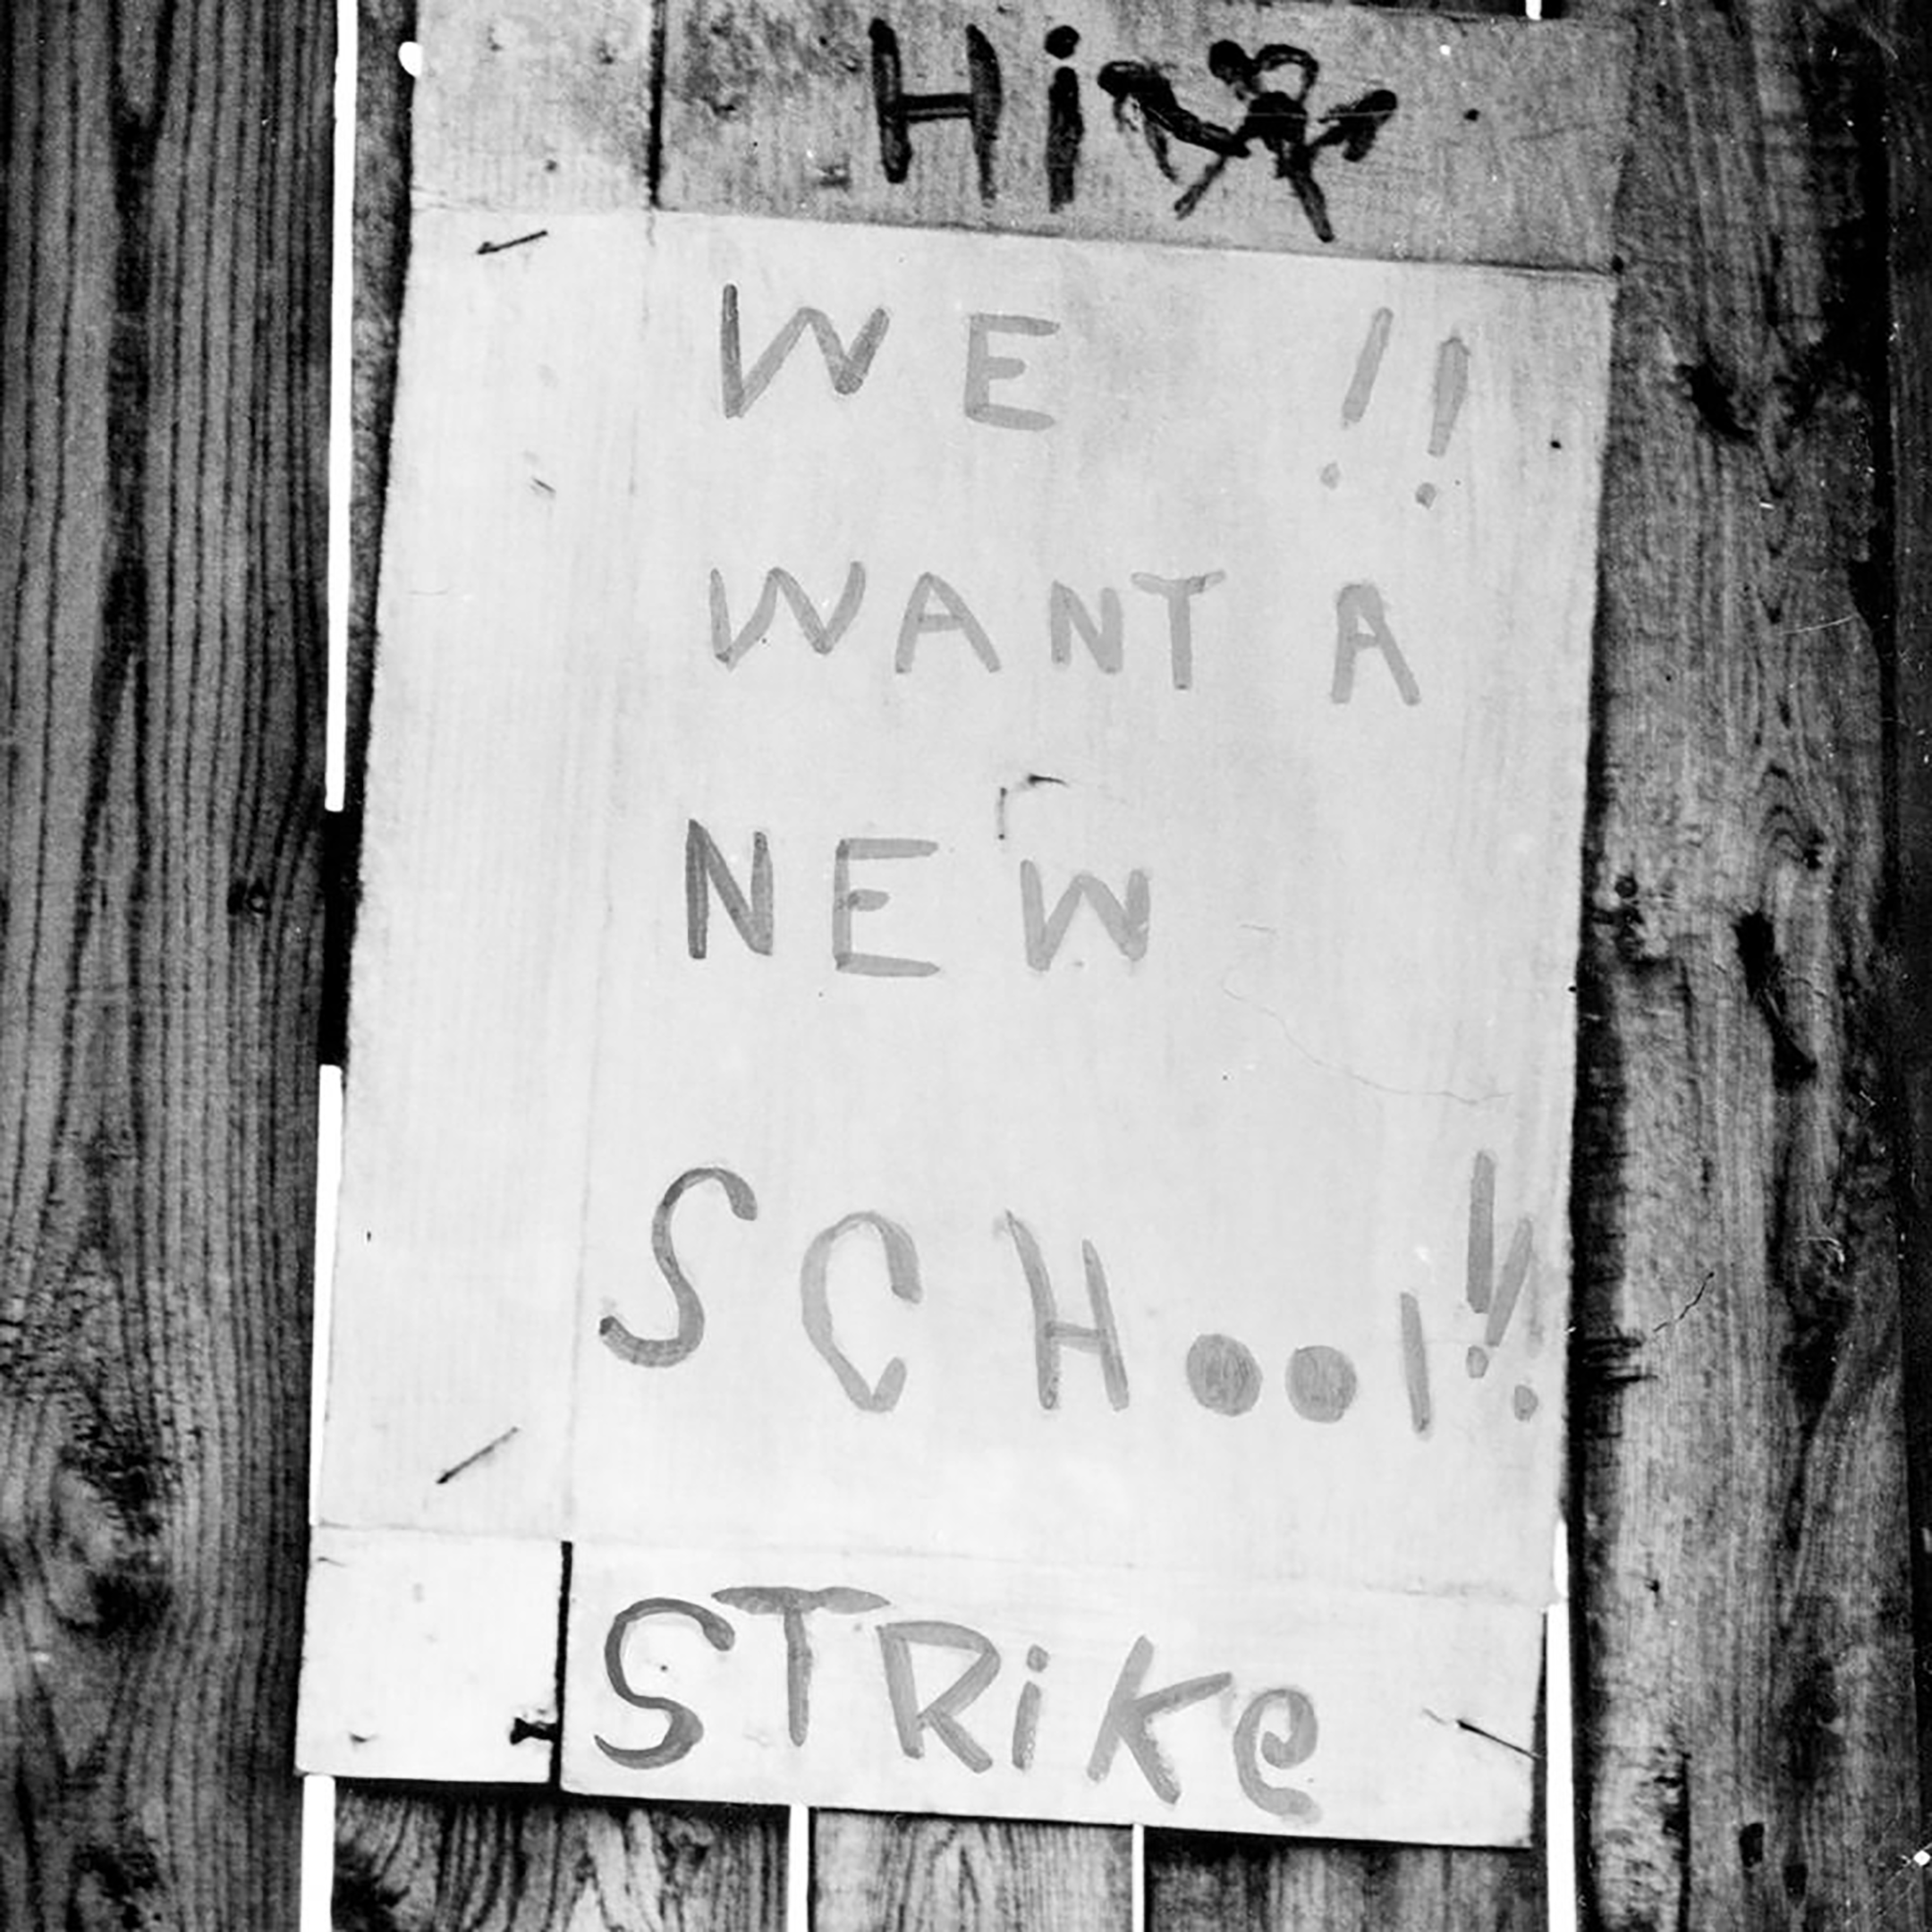 emade sign created by students in 1951 protesting wretched conditions at their school. the sign reads "hi we want a new school! strike"